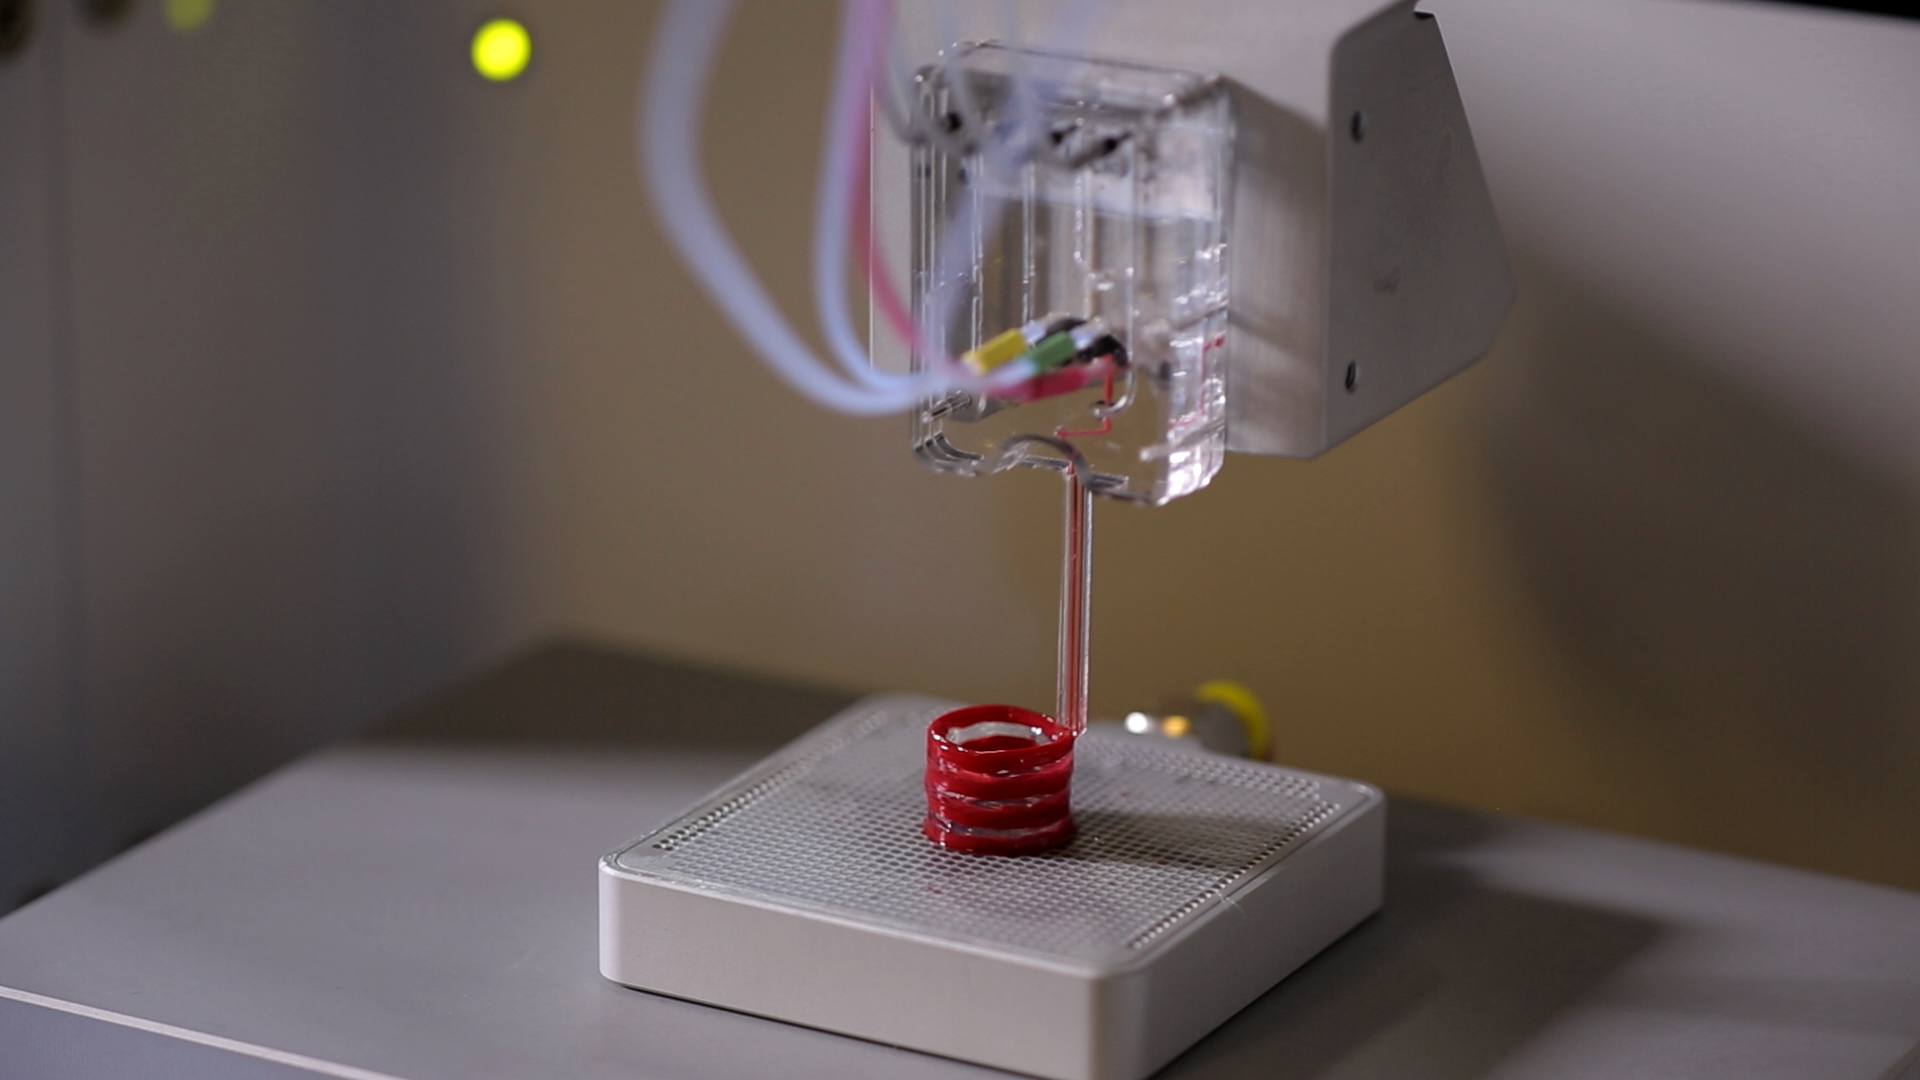 3D bioprinted muscle ring. Photo via Aspect Biosystems.